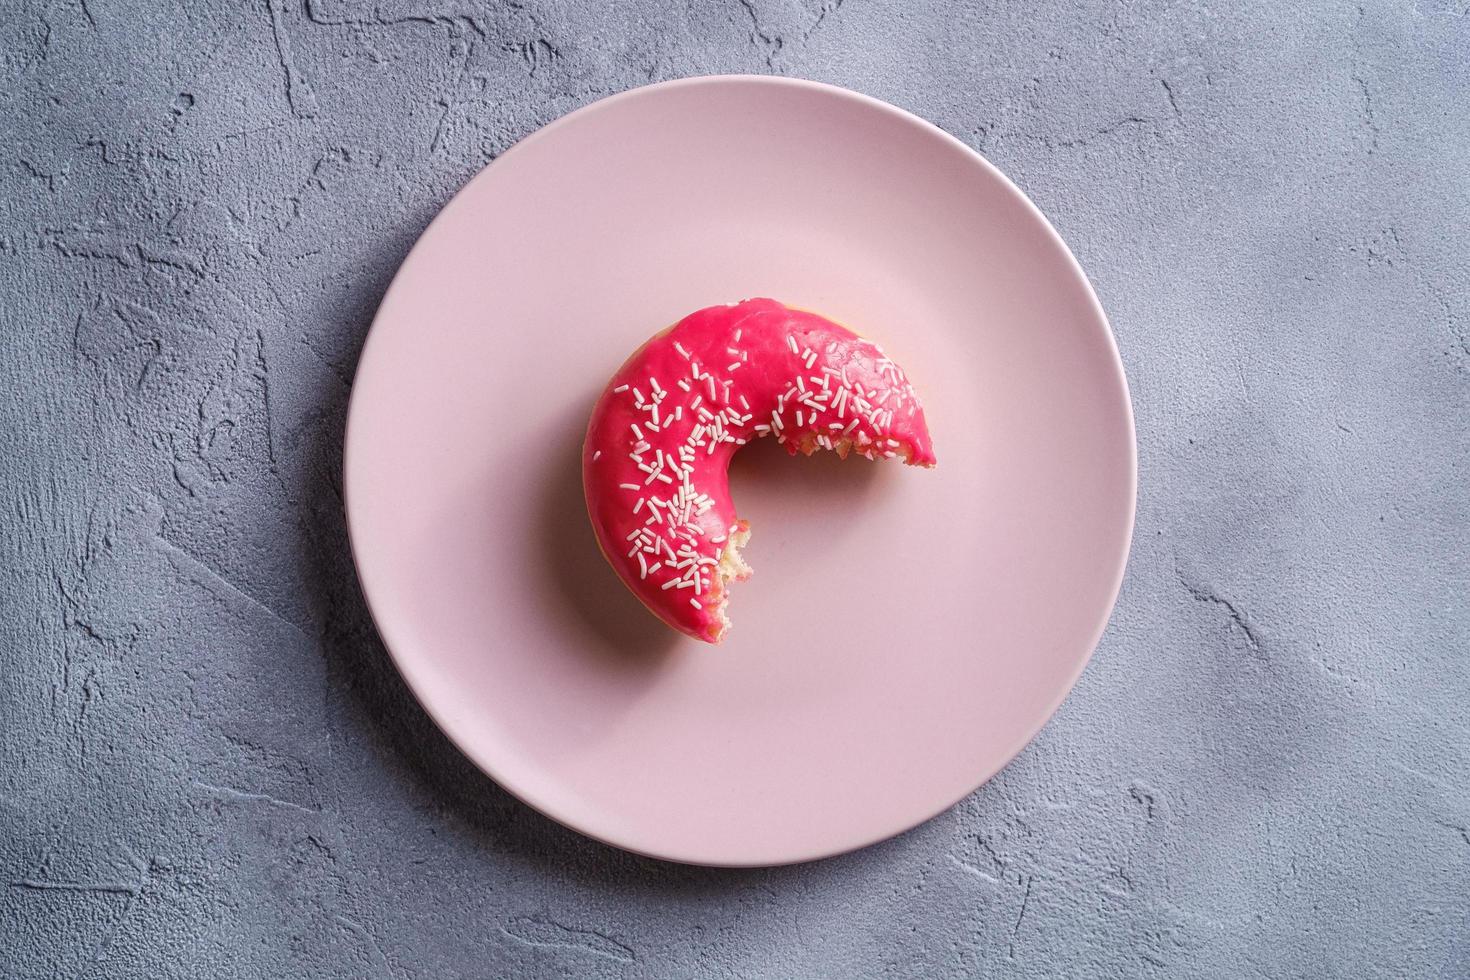 Bitten pink donut with sprinkles  photo